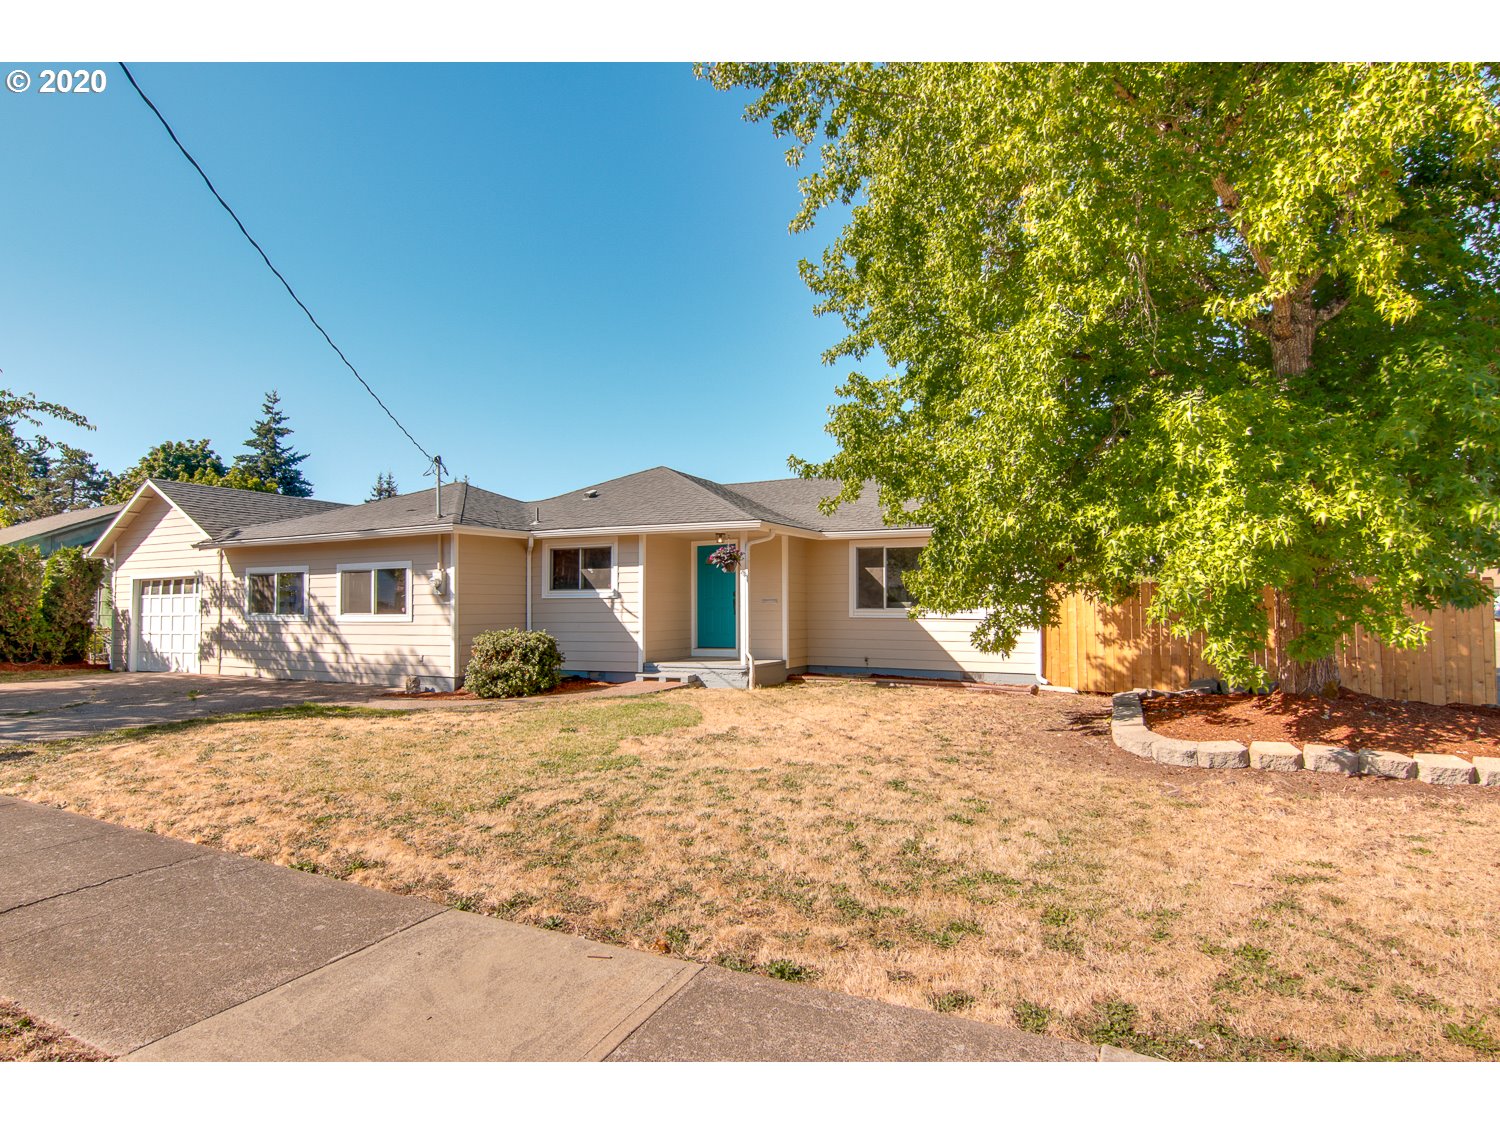 795 GERTH AVE NW (1 of 20)